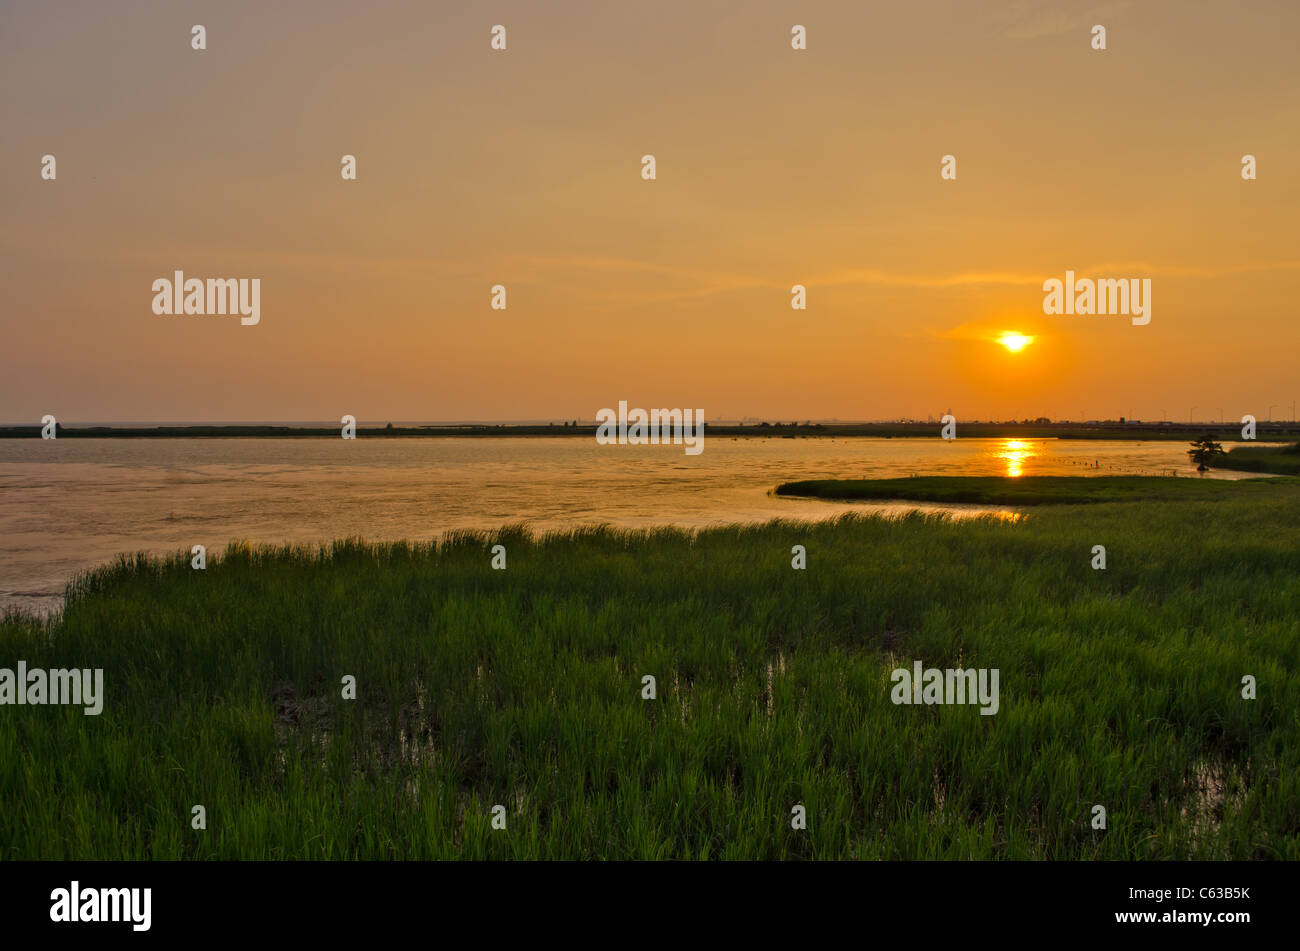 Sunset Over Mobile Bay and I-10 Freeway Stock Photo